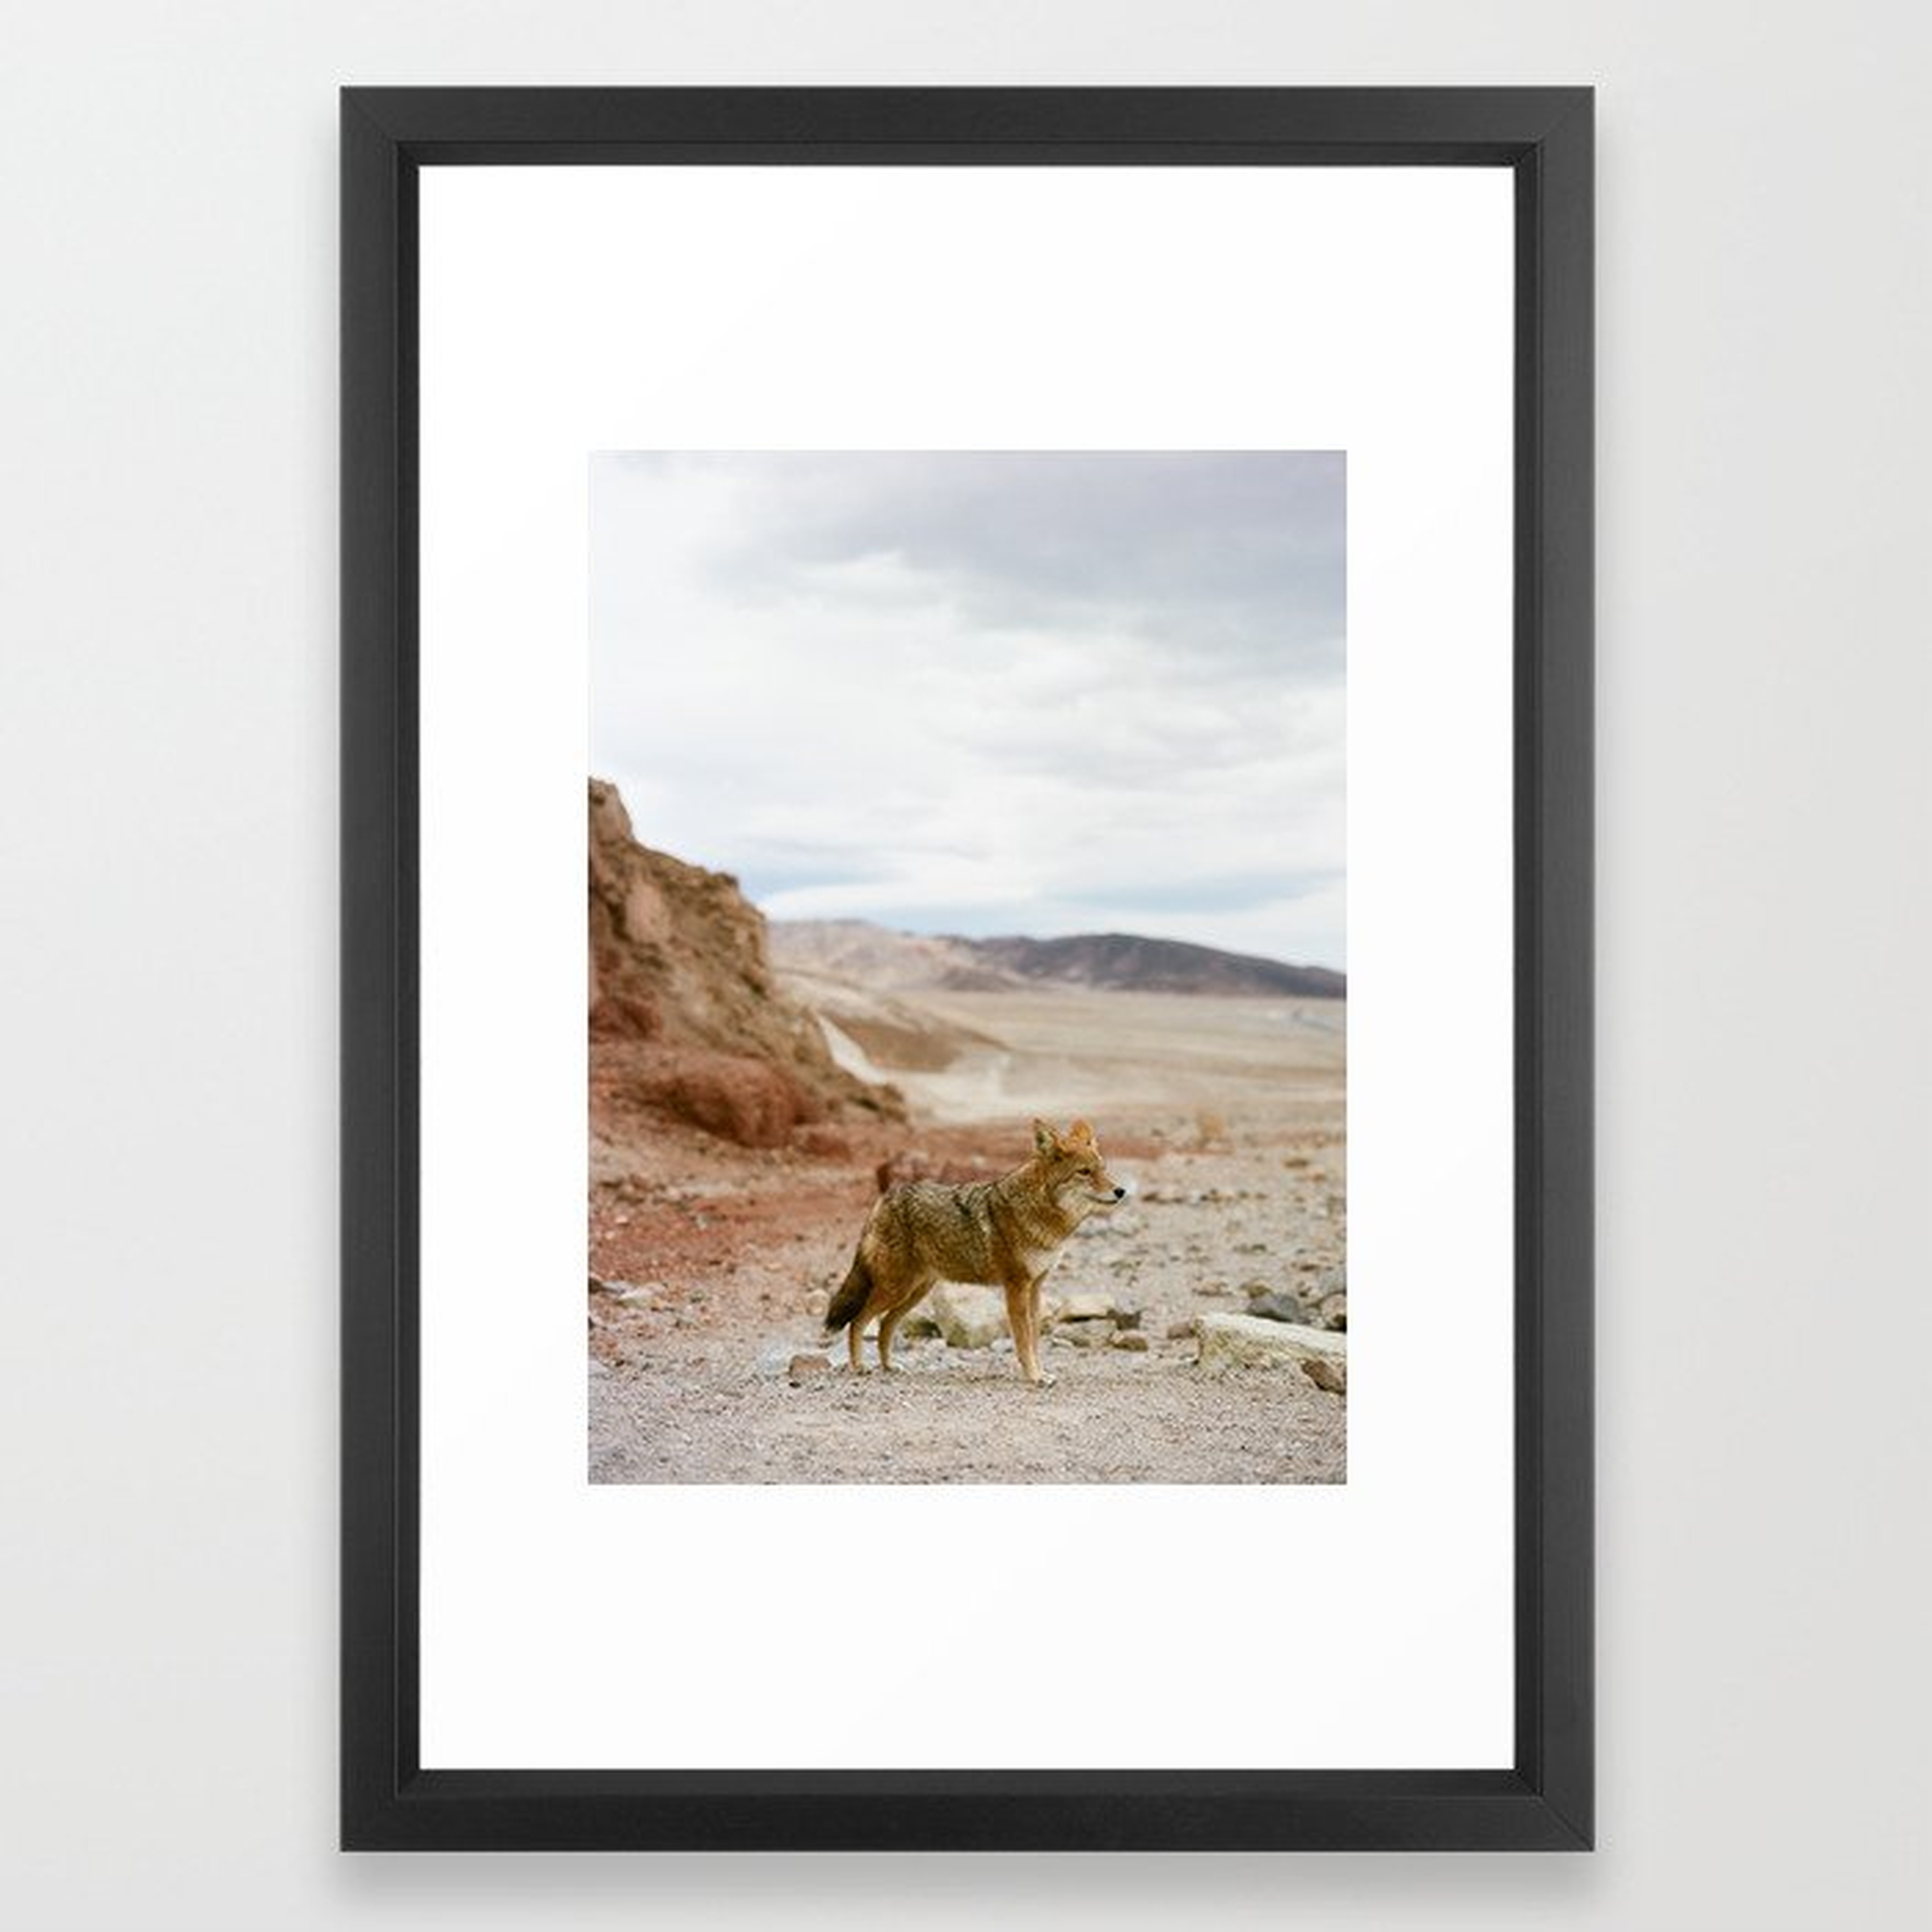 Coyote in Death Valley California Framed Art Print - Society6